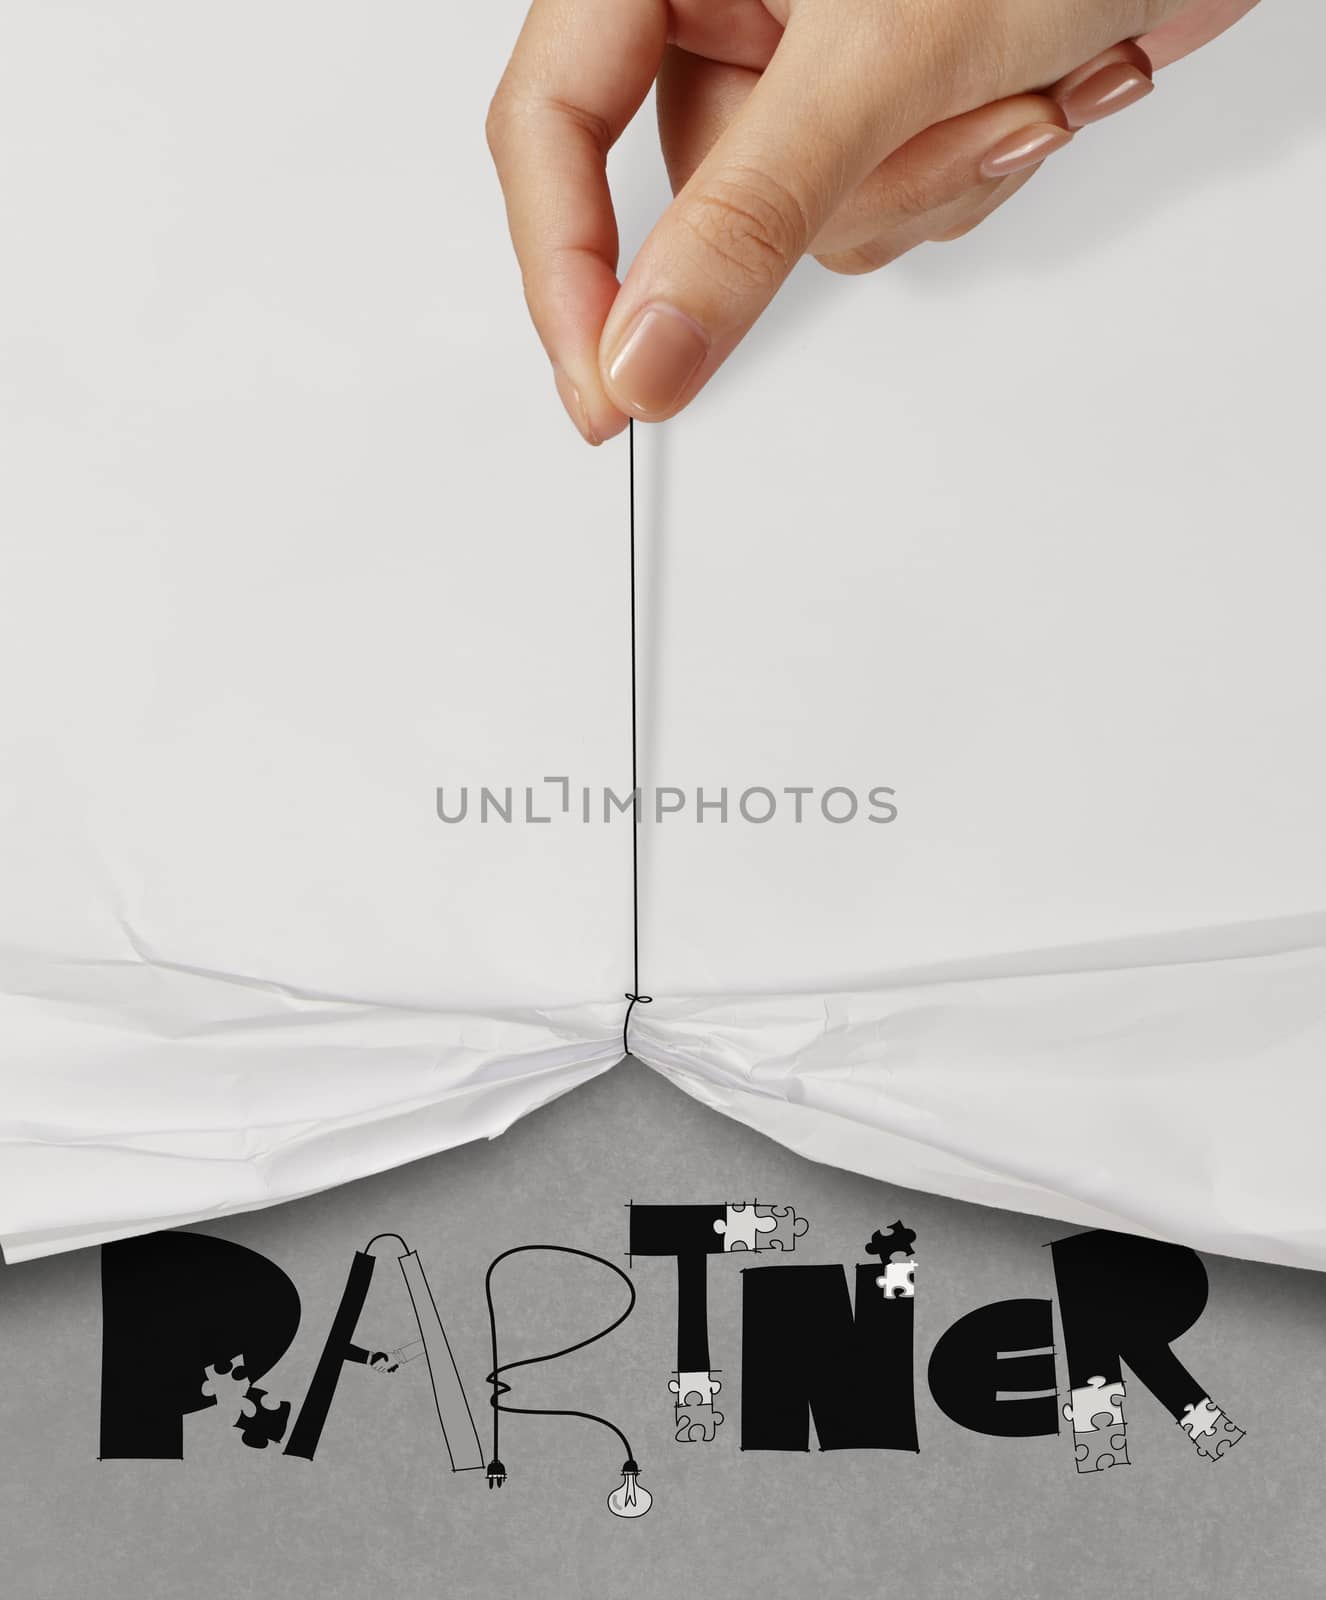 business hand pull rope open wrinkled paper show PARTNER design text as concept